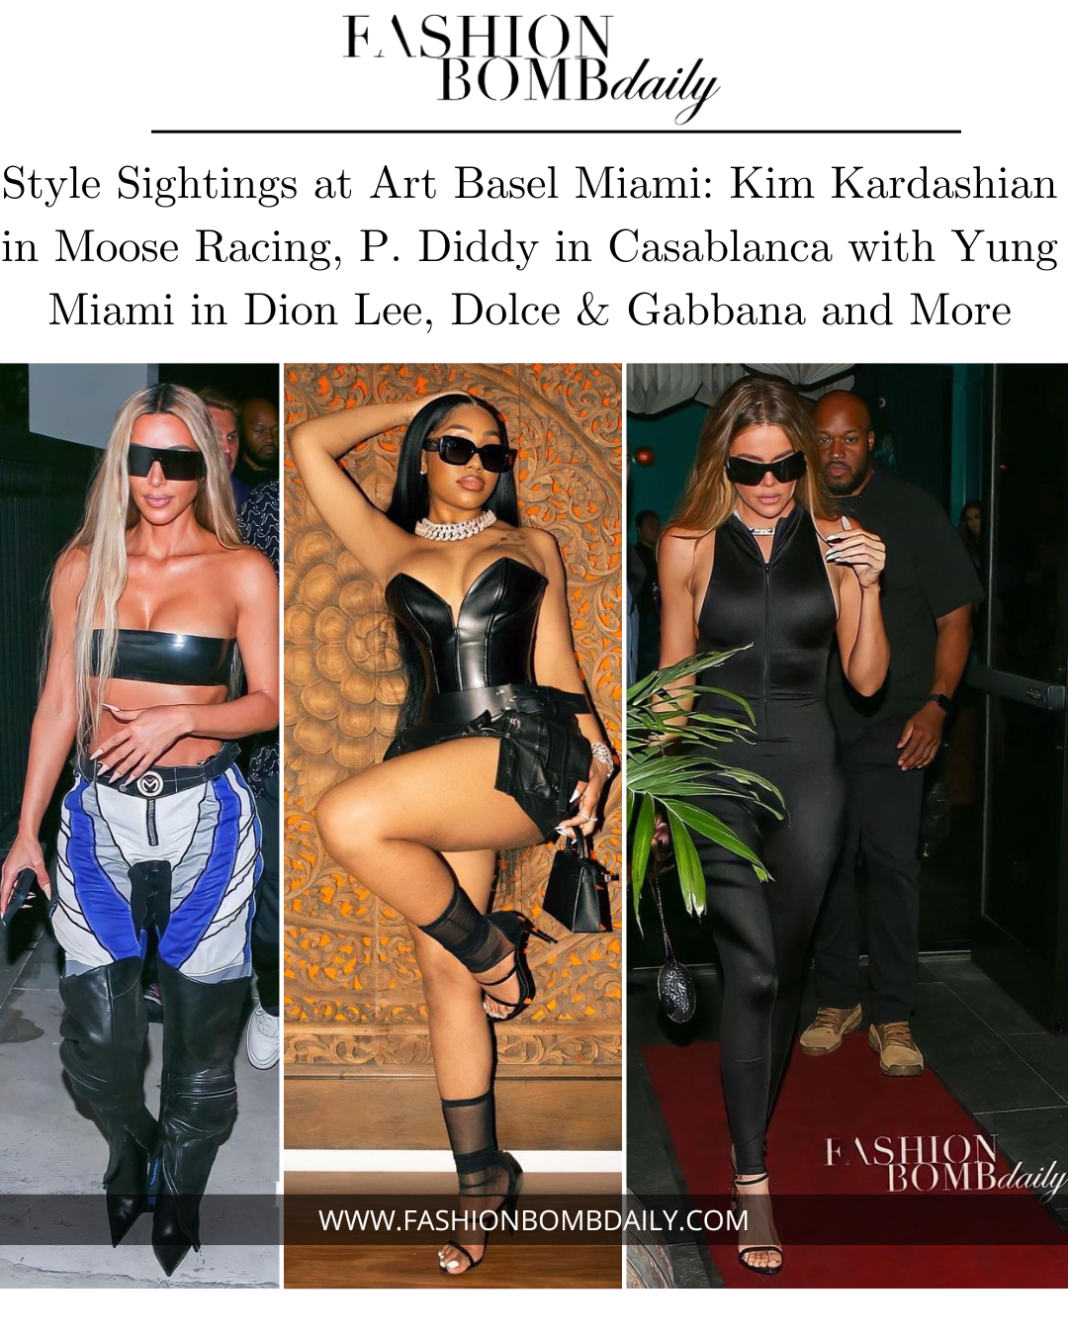 Kim Kardashian in Moose Racing, P. Diddy in Casablanca with Yung Miami in Dion Lee, Dolce & Gabbana and More